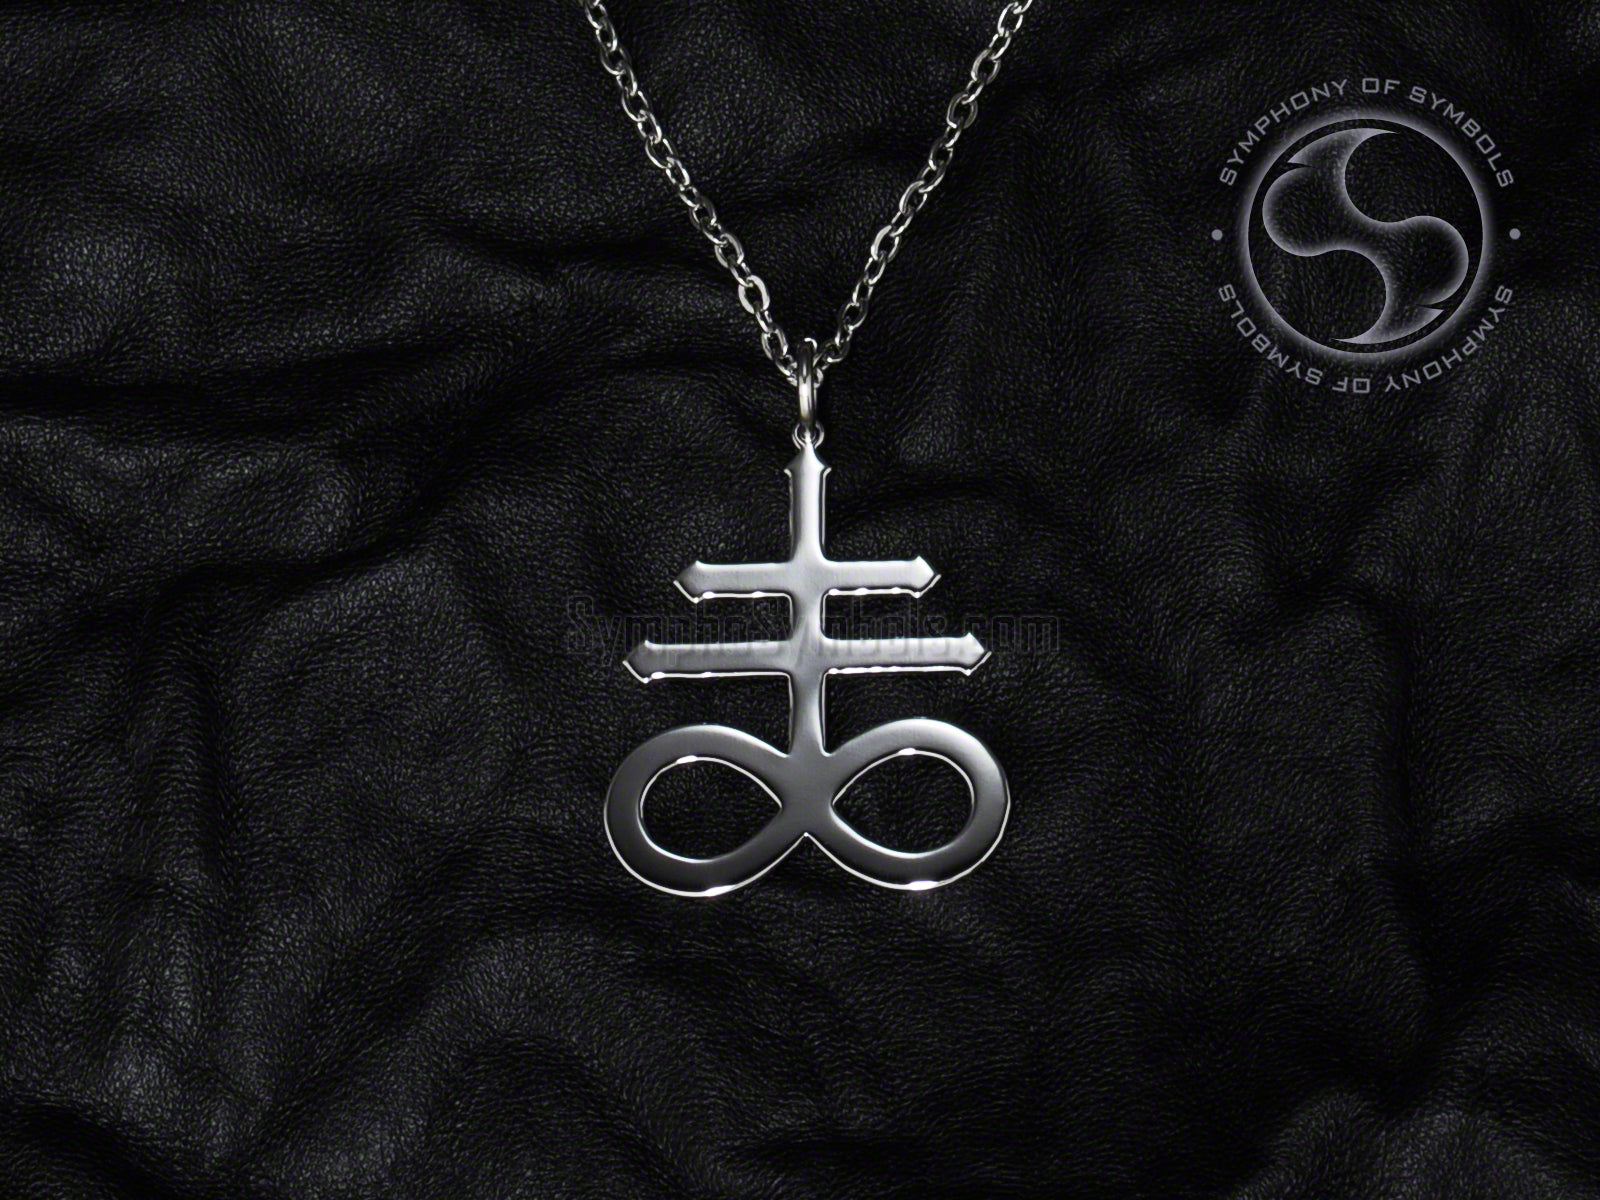 Leviathan Cross Pendant Necklace in Stainless Steel | Satanic ...